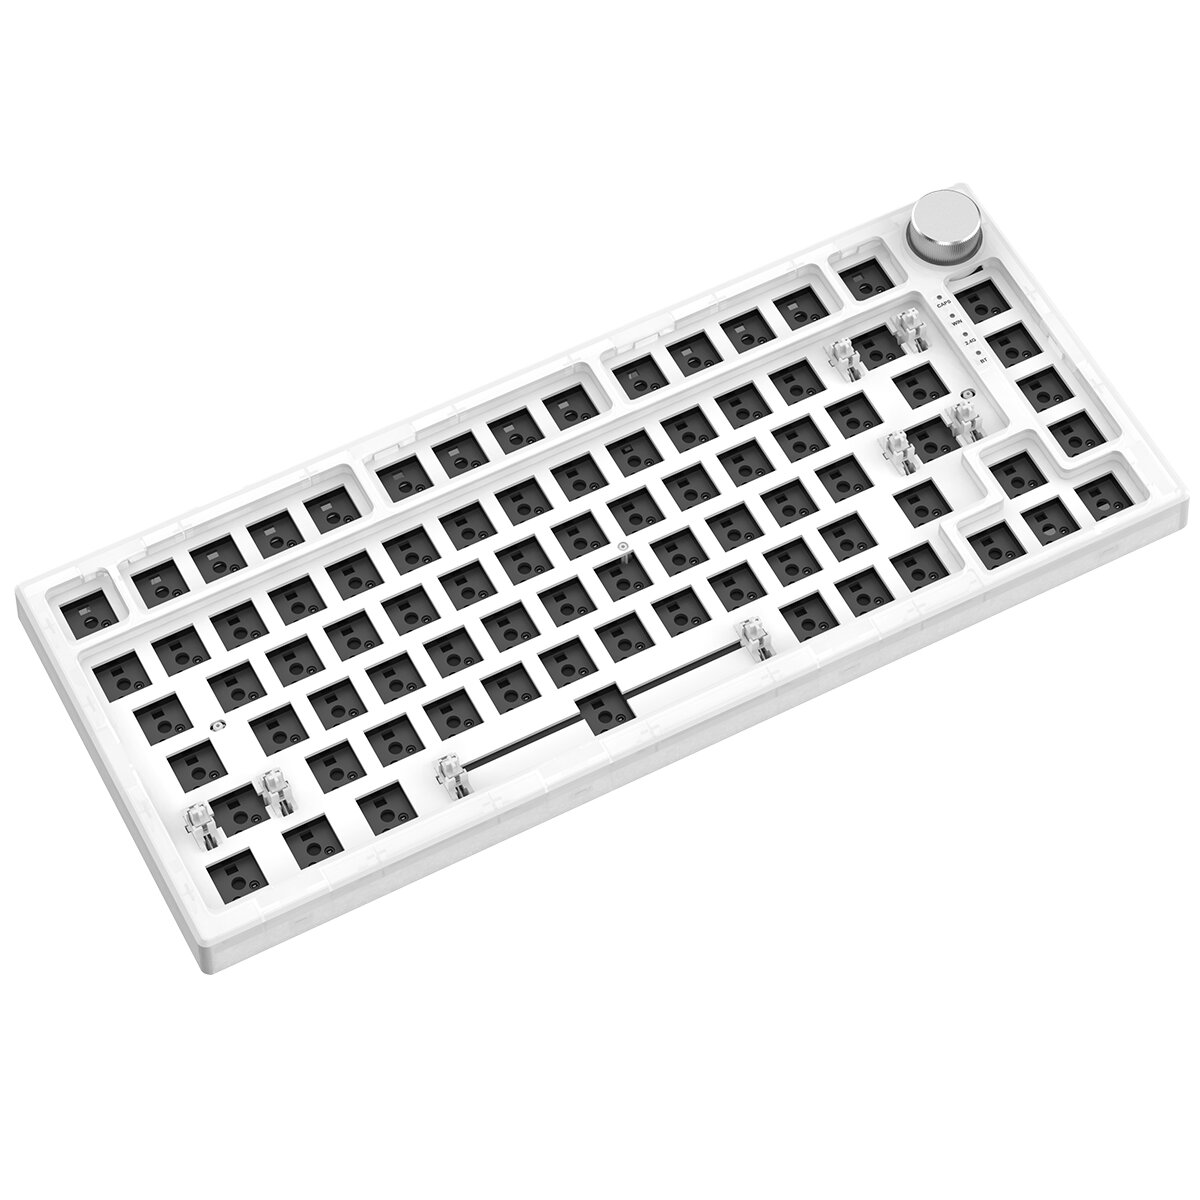 FEKER IK75 Keyboard Customized Kit 82 Keys Hot Swappable 75% RGB Wired bluetooth 5.0 2.4GHz Triple Mode PCB Mounting Plate Translucent Milky White Case